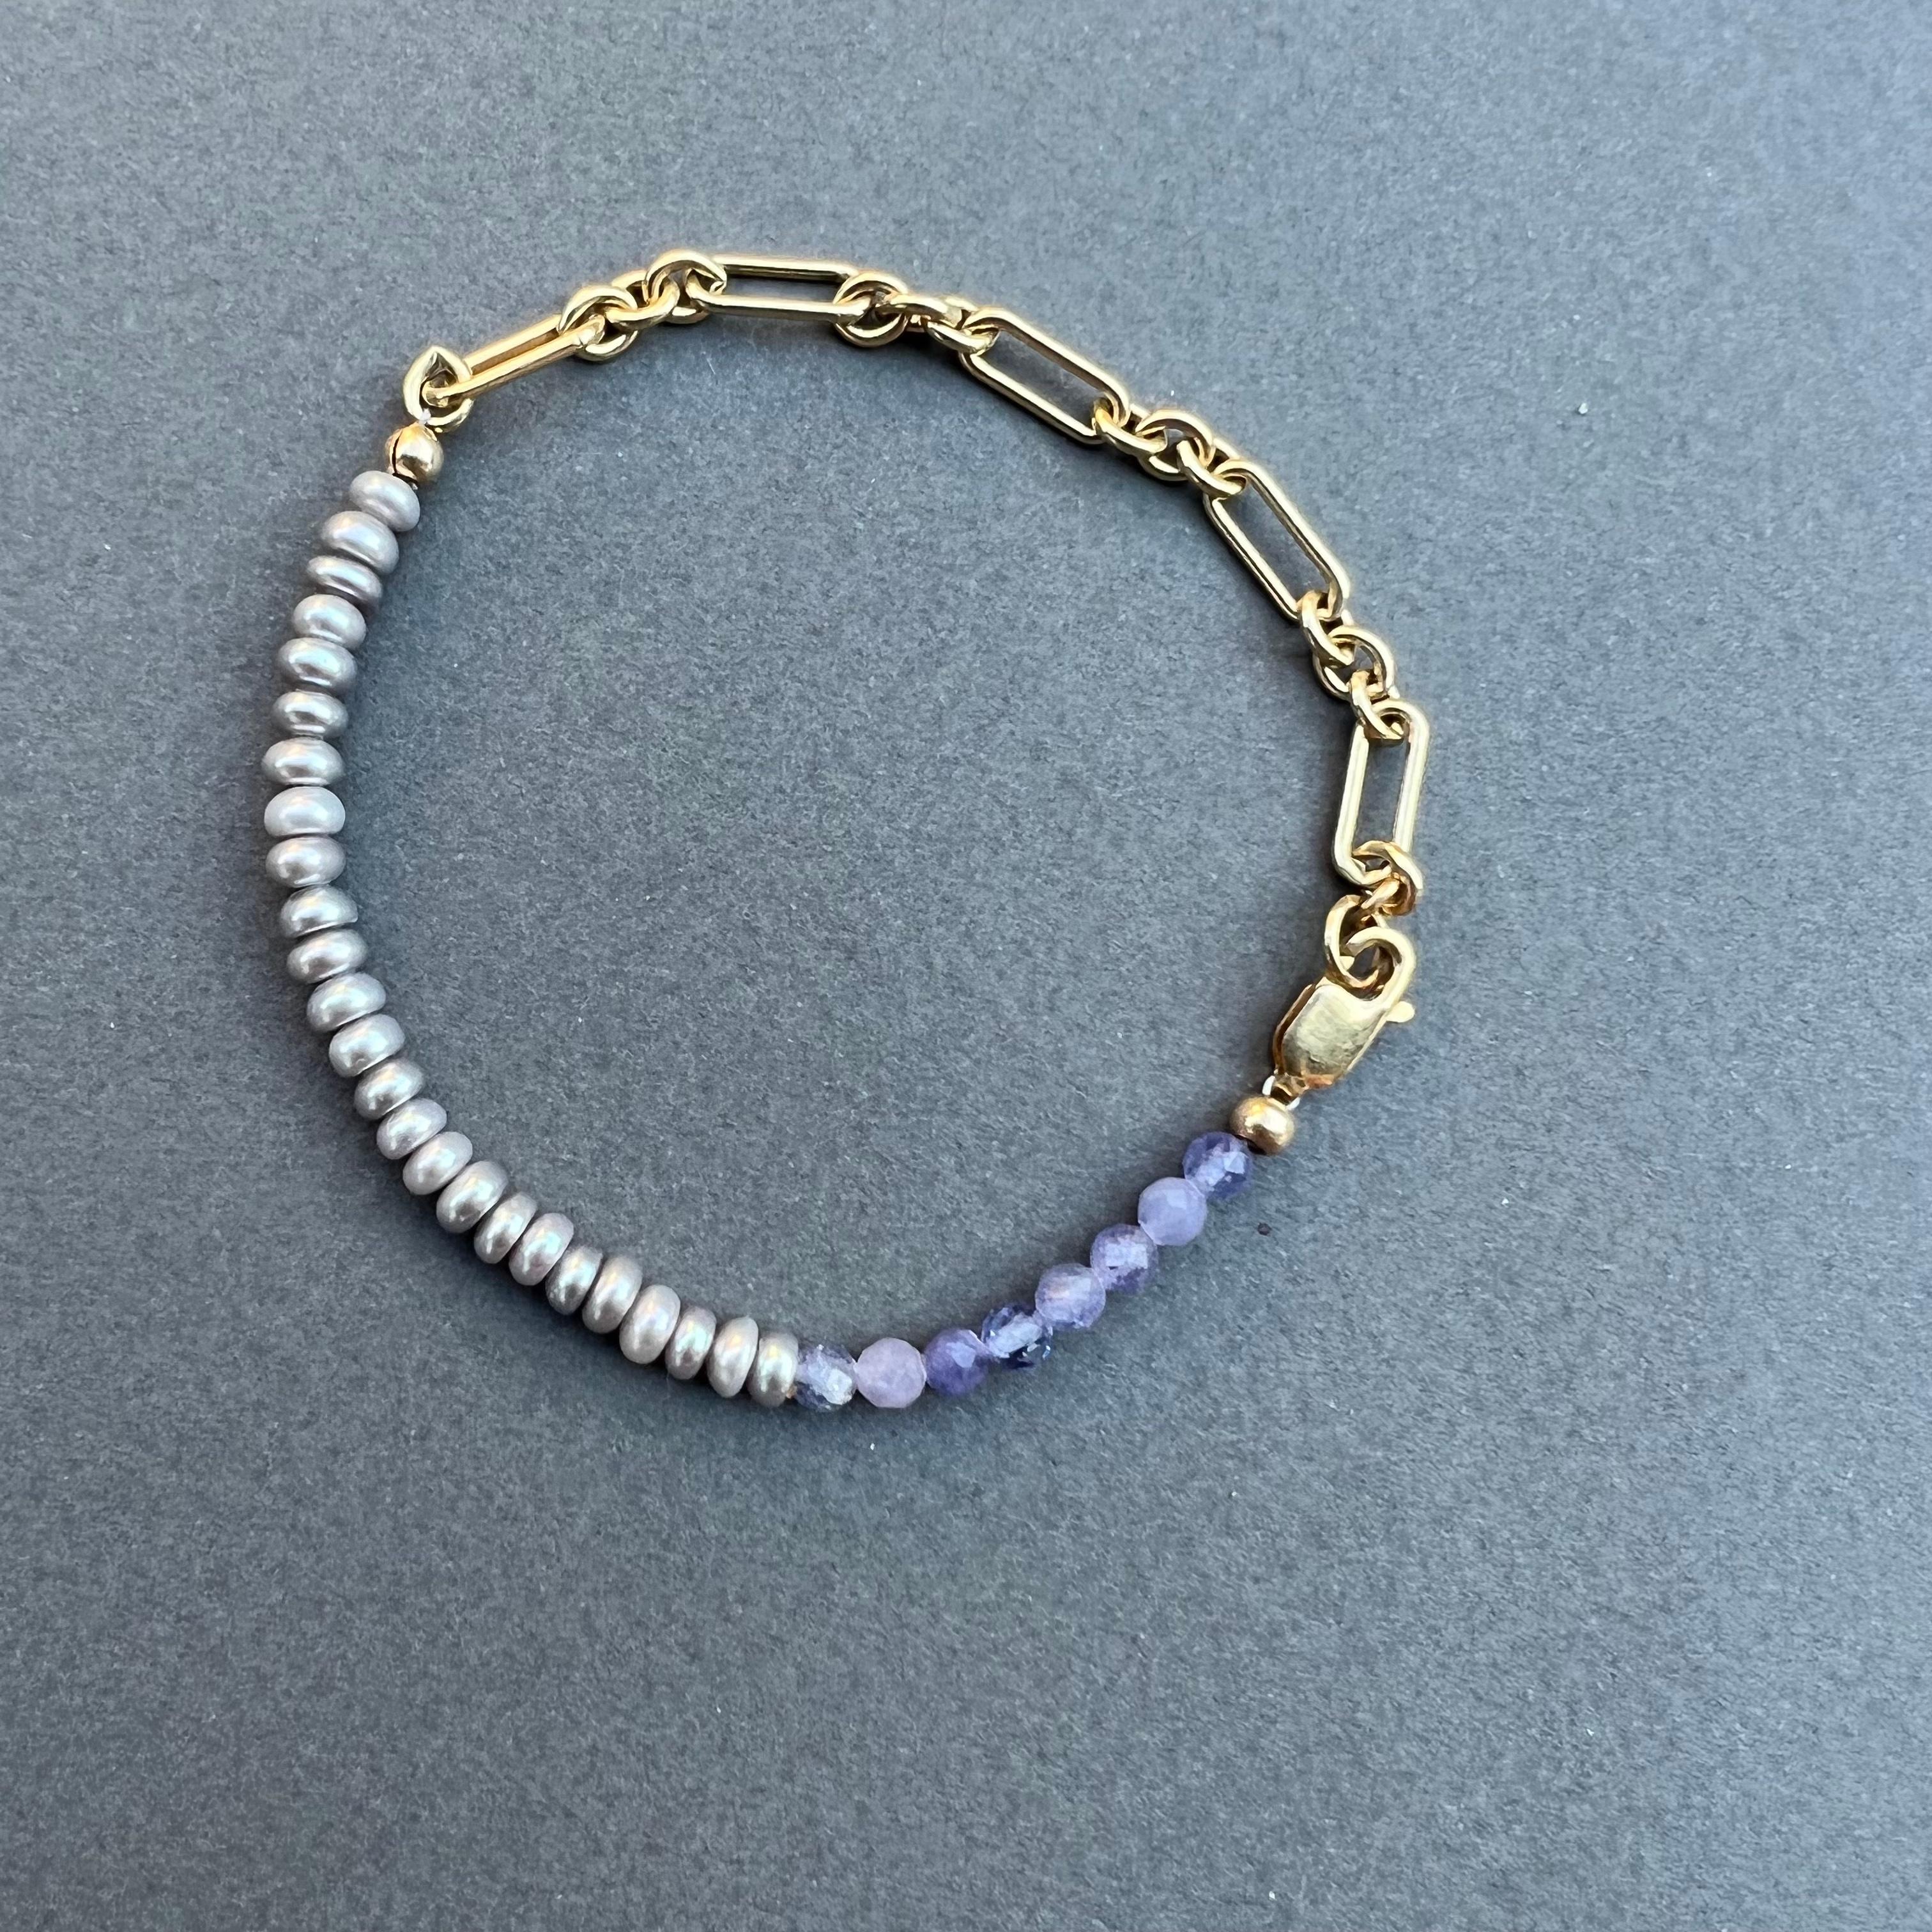 Round Cut Pearl Tanzanite Bead Bracelet Gold Filled Chain J Dauphin For Sale